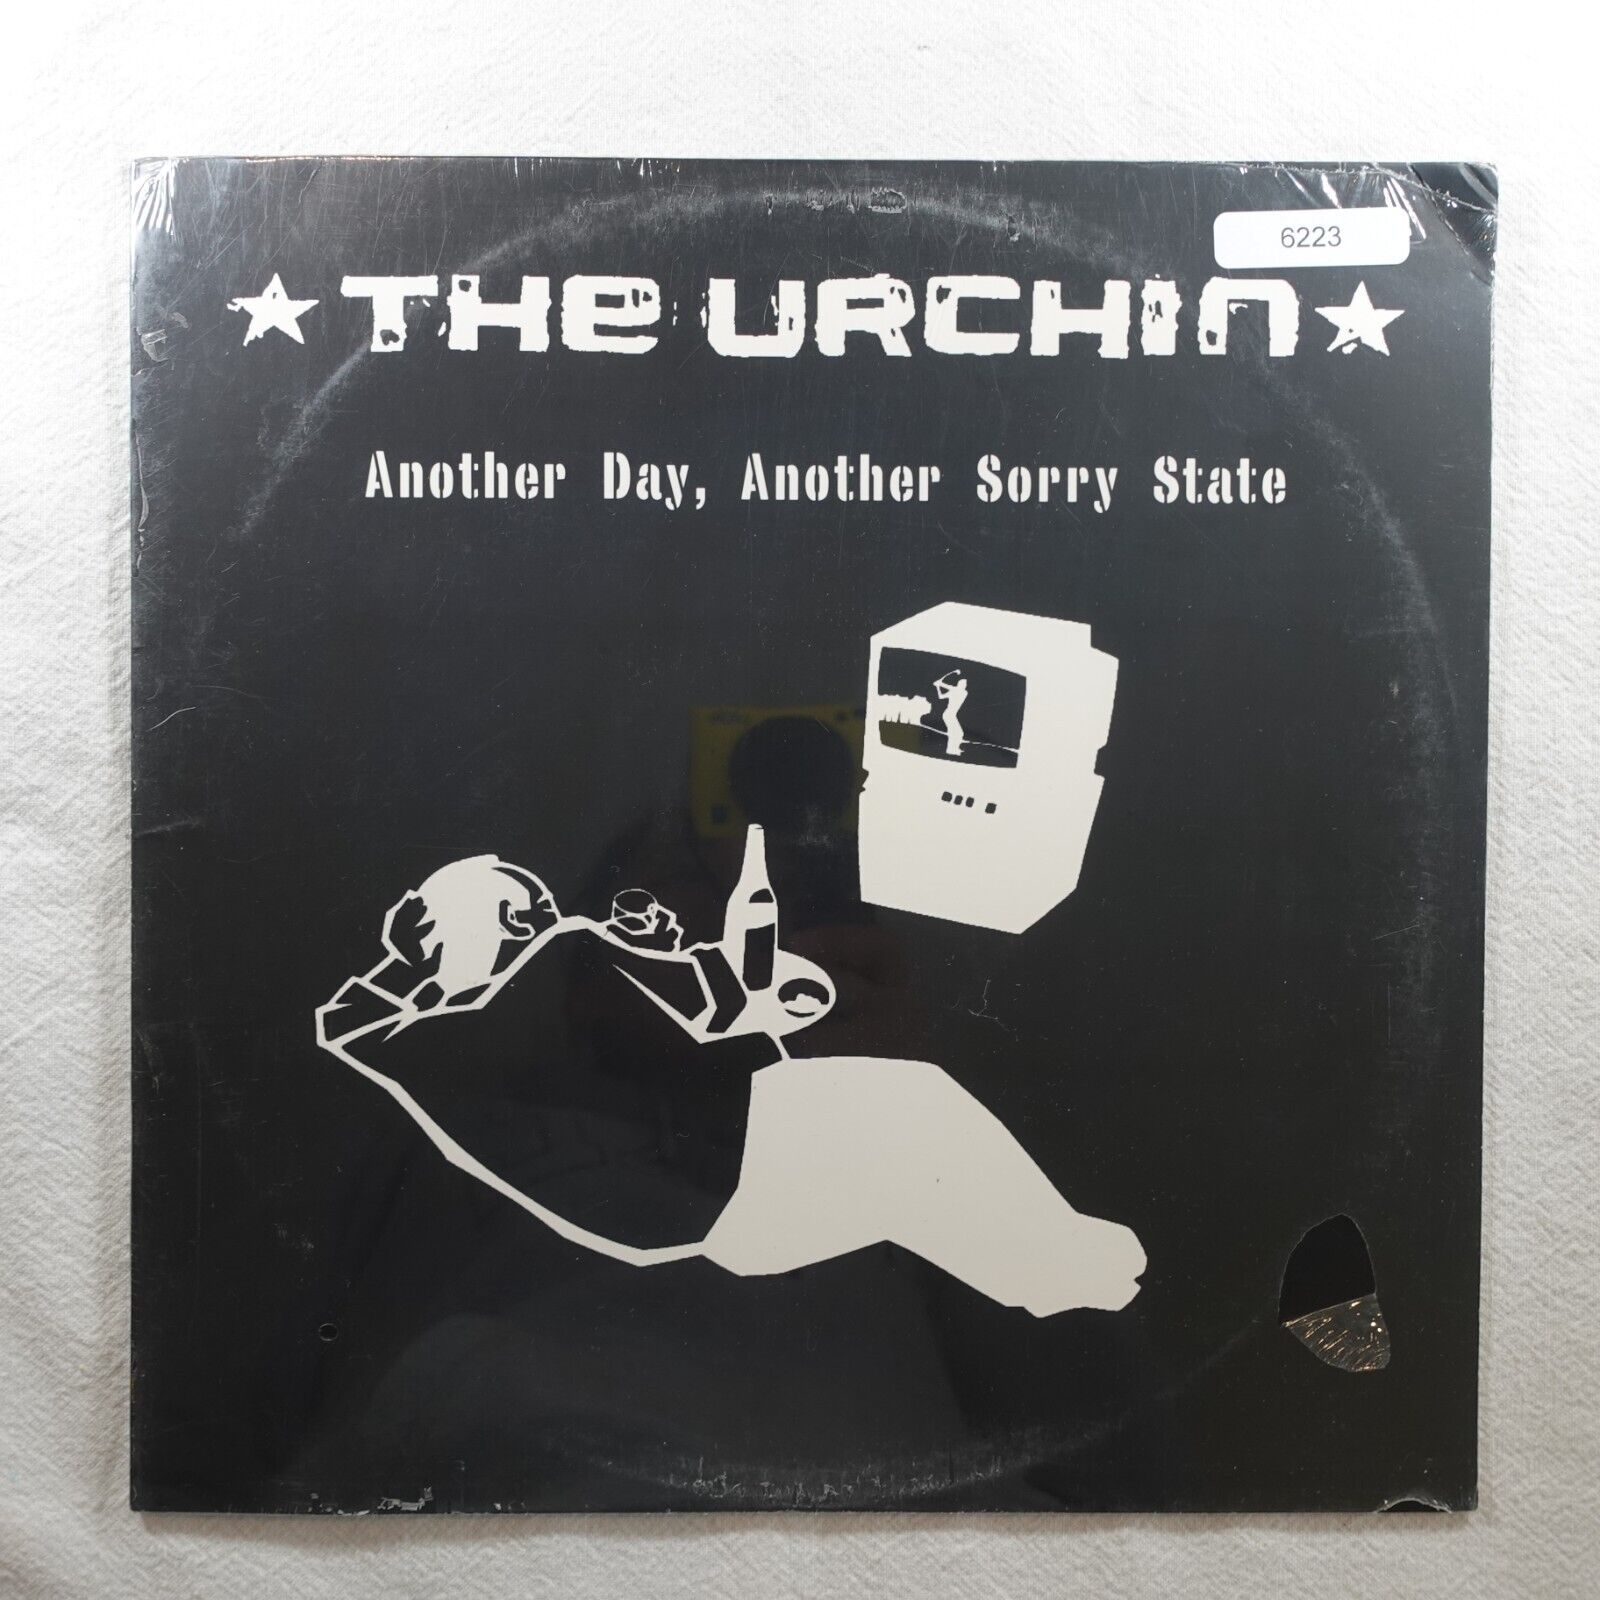 NEW The Urchin Another Day Another Sory State   Record Album Vinyl LP